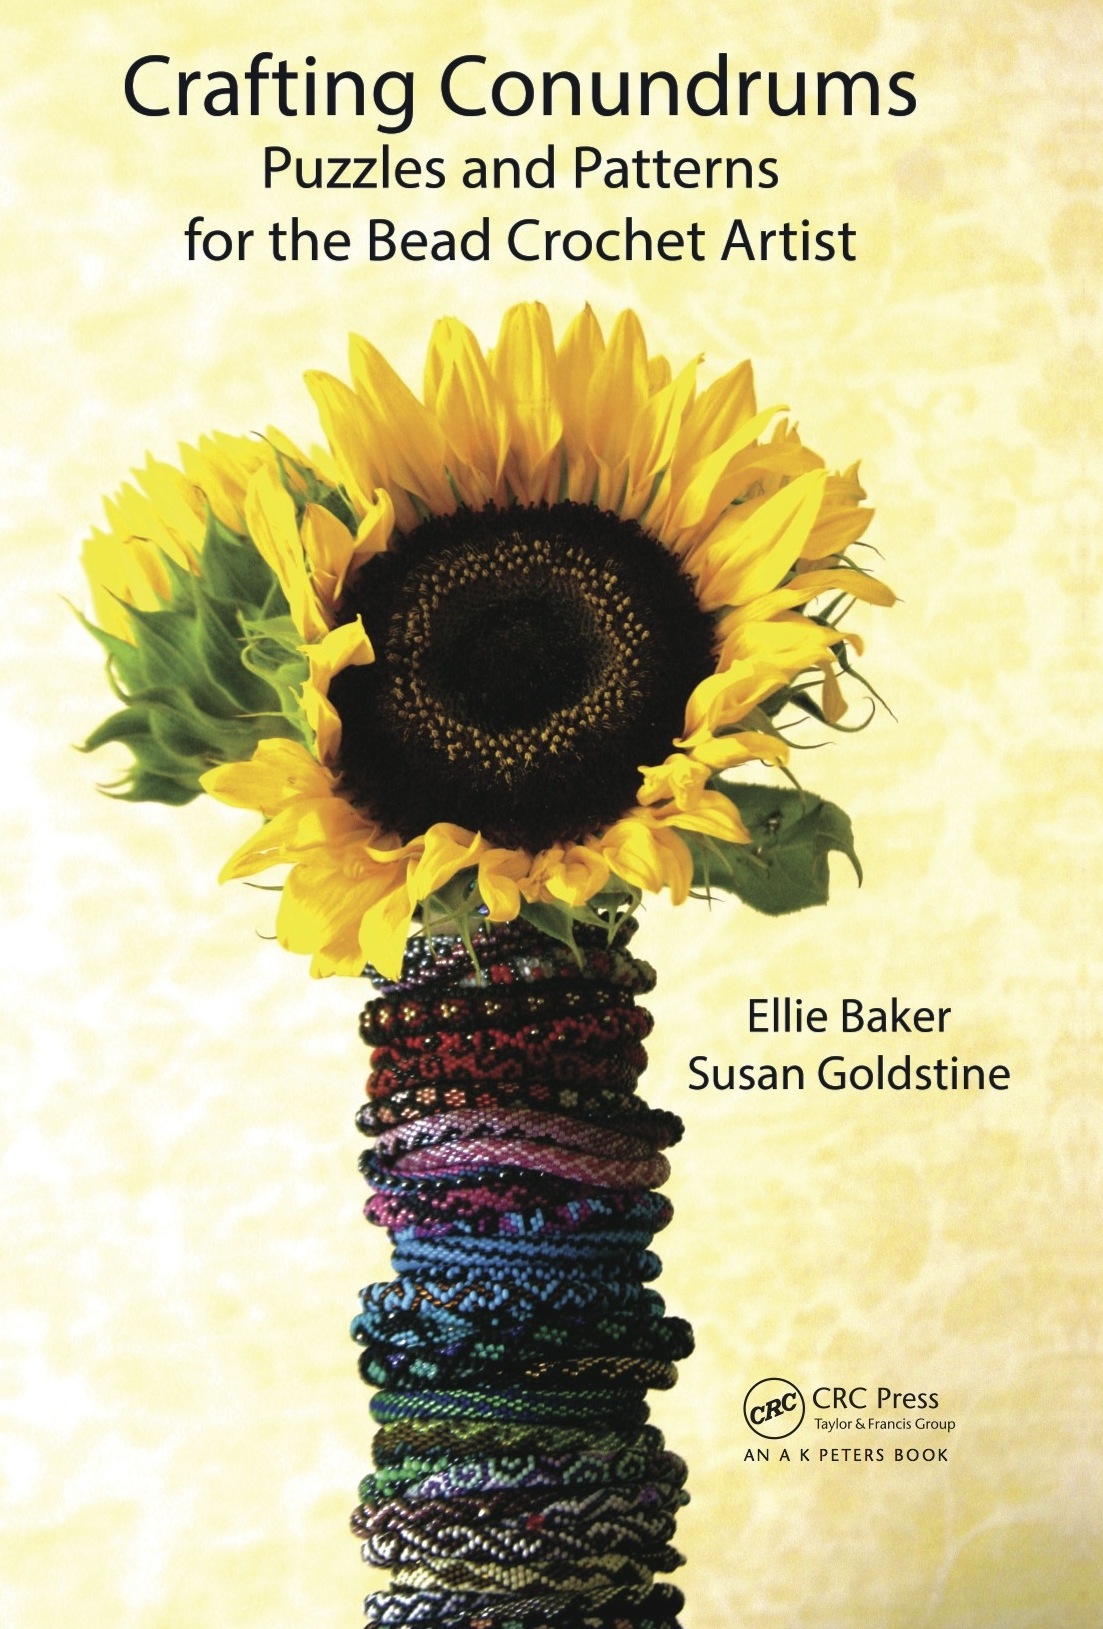 Front cover of Crafting Conundrums, featuring a sunflower atop a stack of beaded bracelets.